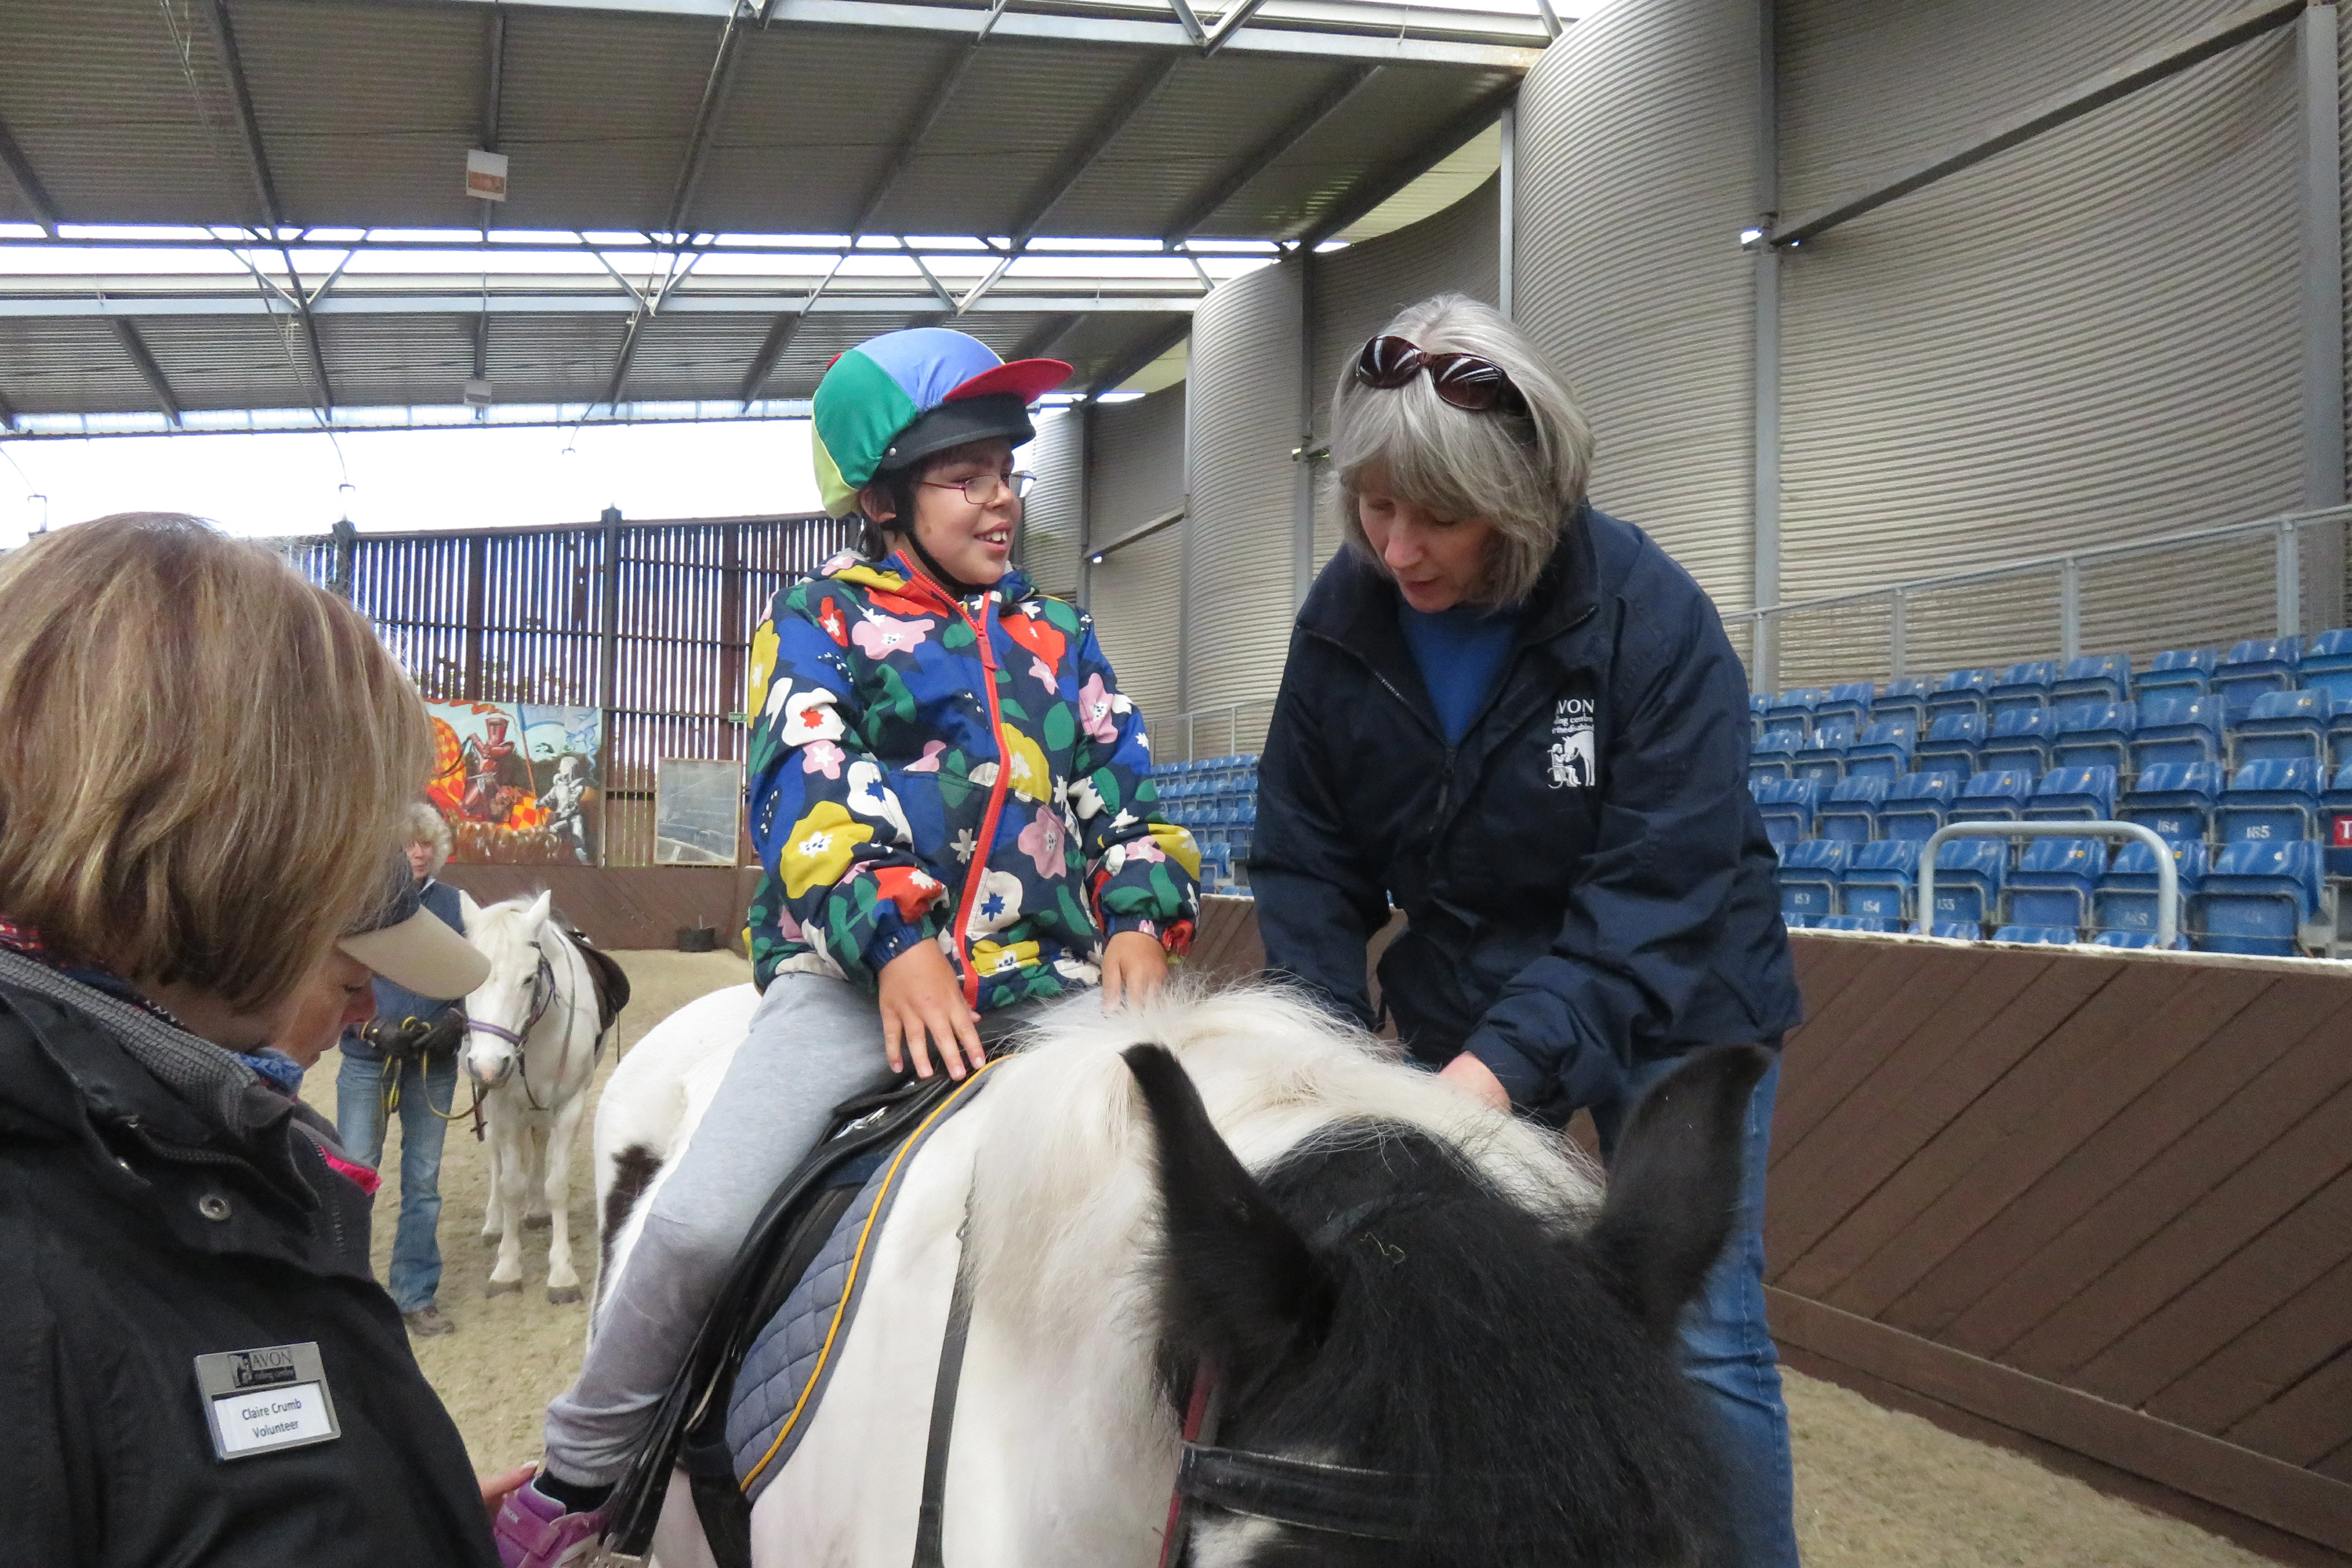 Kim Langbridge, a coach at Avon Riding Centre and Beatrice Little, aged 10